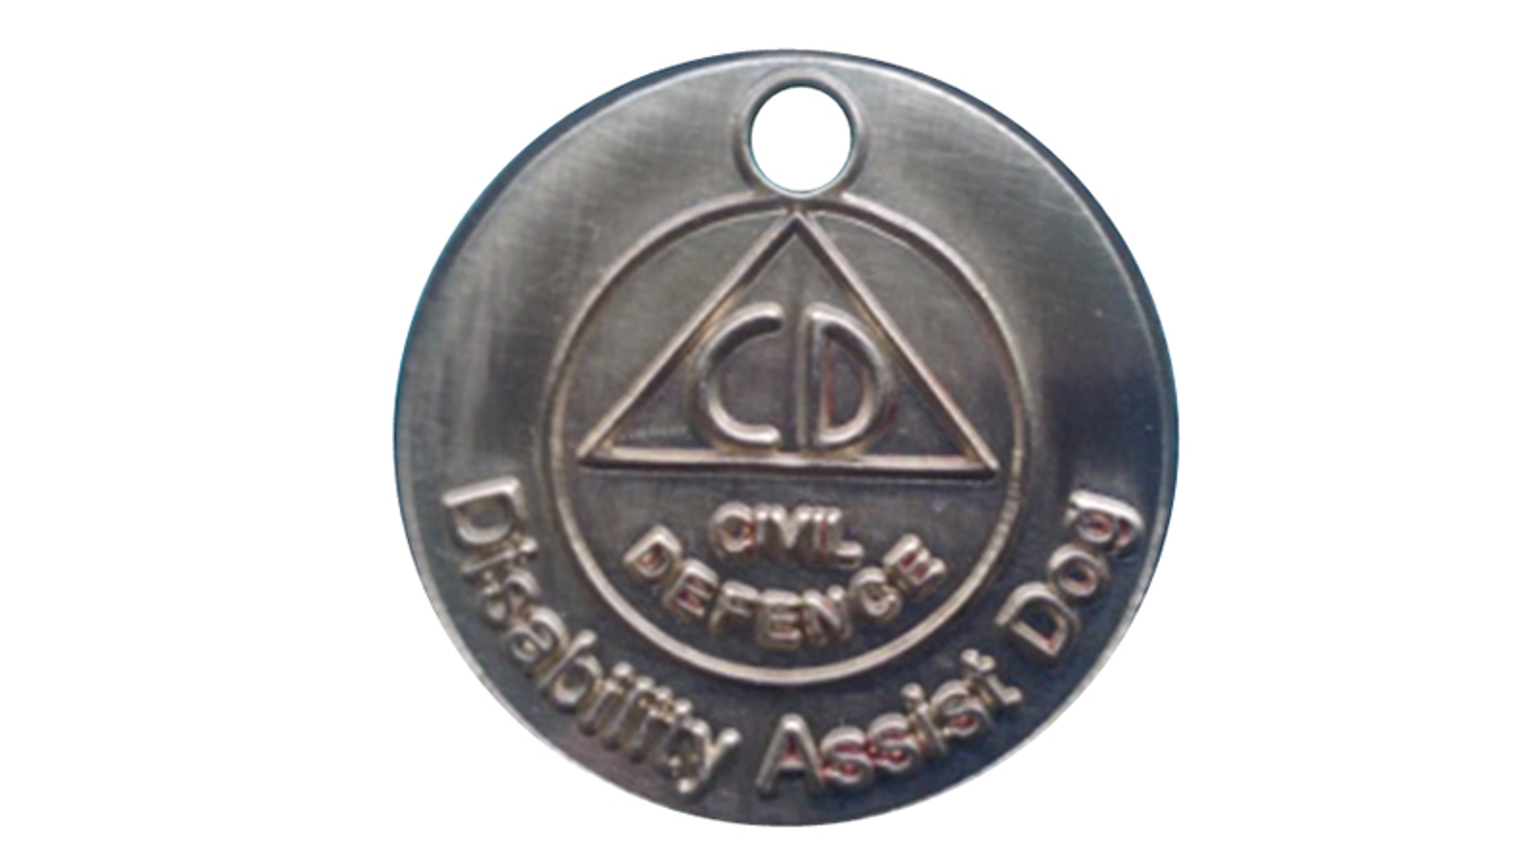 Image showing the Disability Assist Dog identification tag worn by a certified dog.